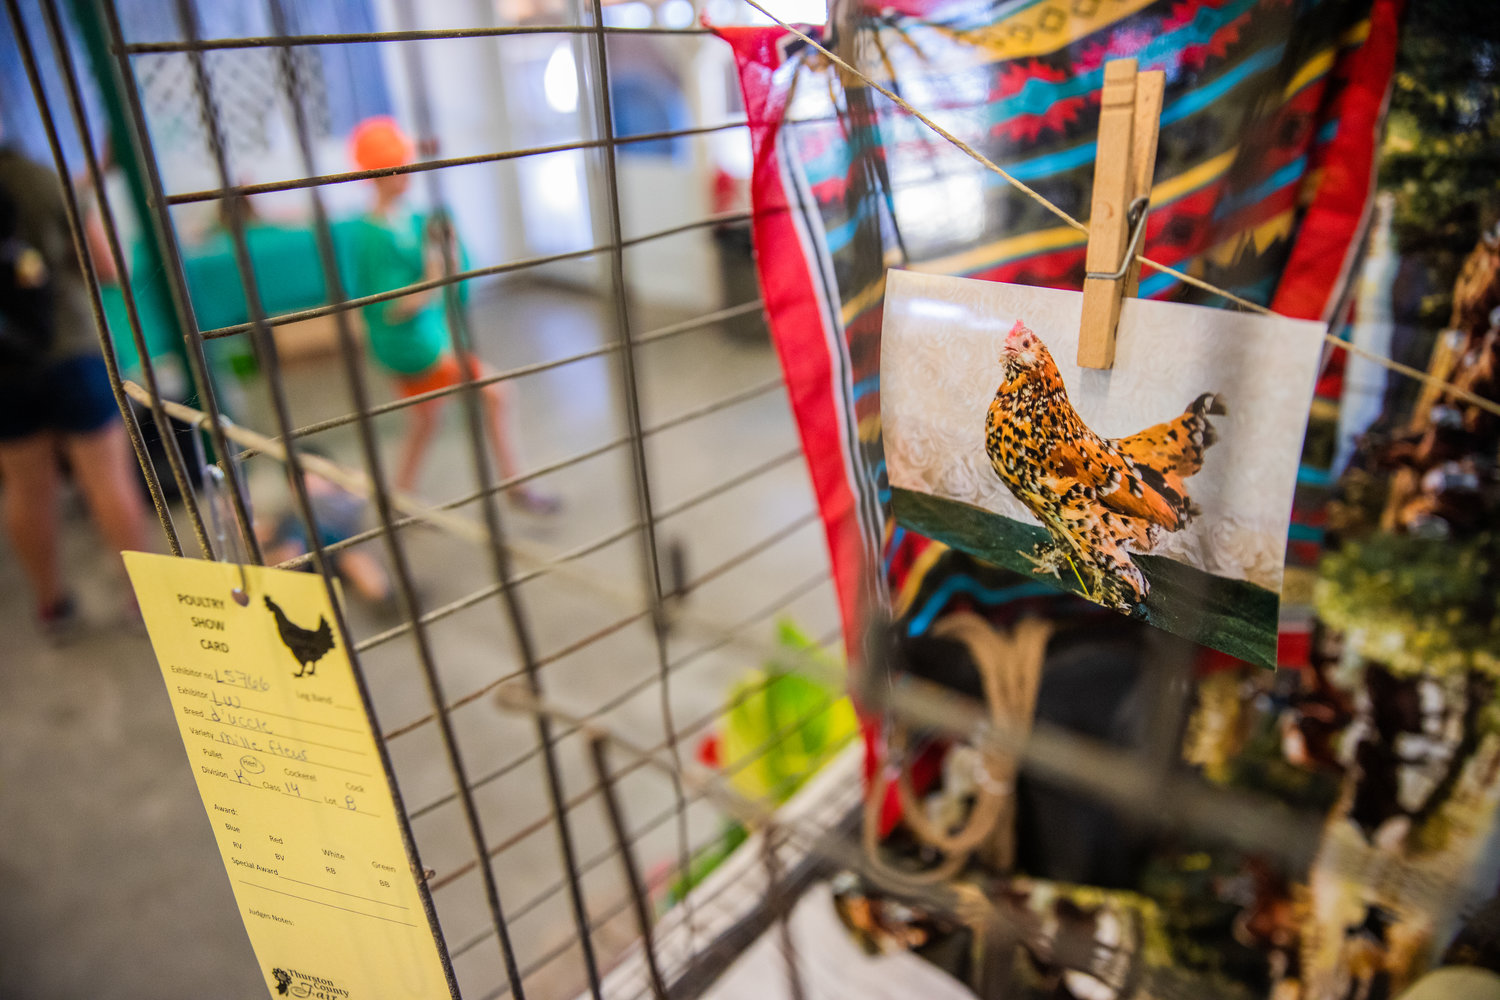 Photos of chickens hang on display inside cages empty of fowl as safety precautions for avian influenza remain in place during the Thurston County Fair on Thursday, July 28.